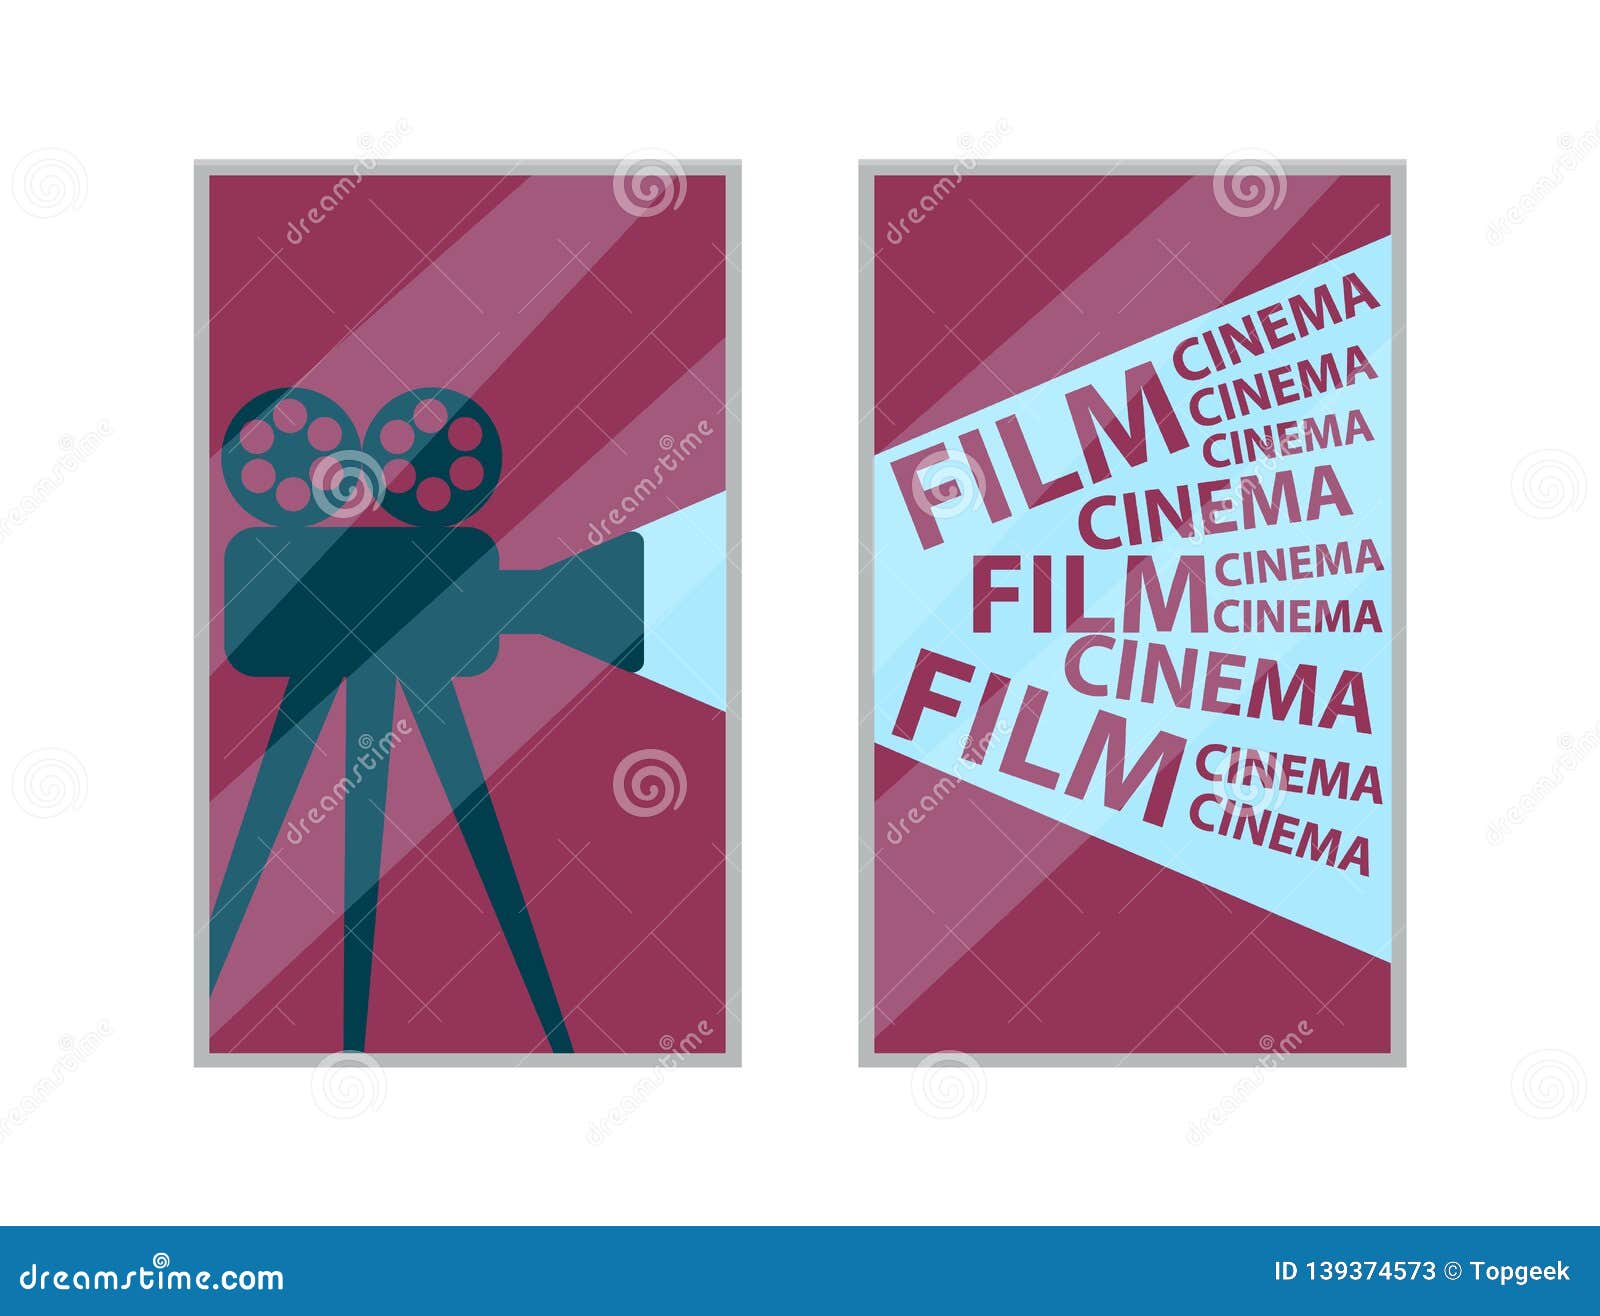 Wall Picture of Old Video Camera with Film Reels Stock Vector